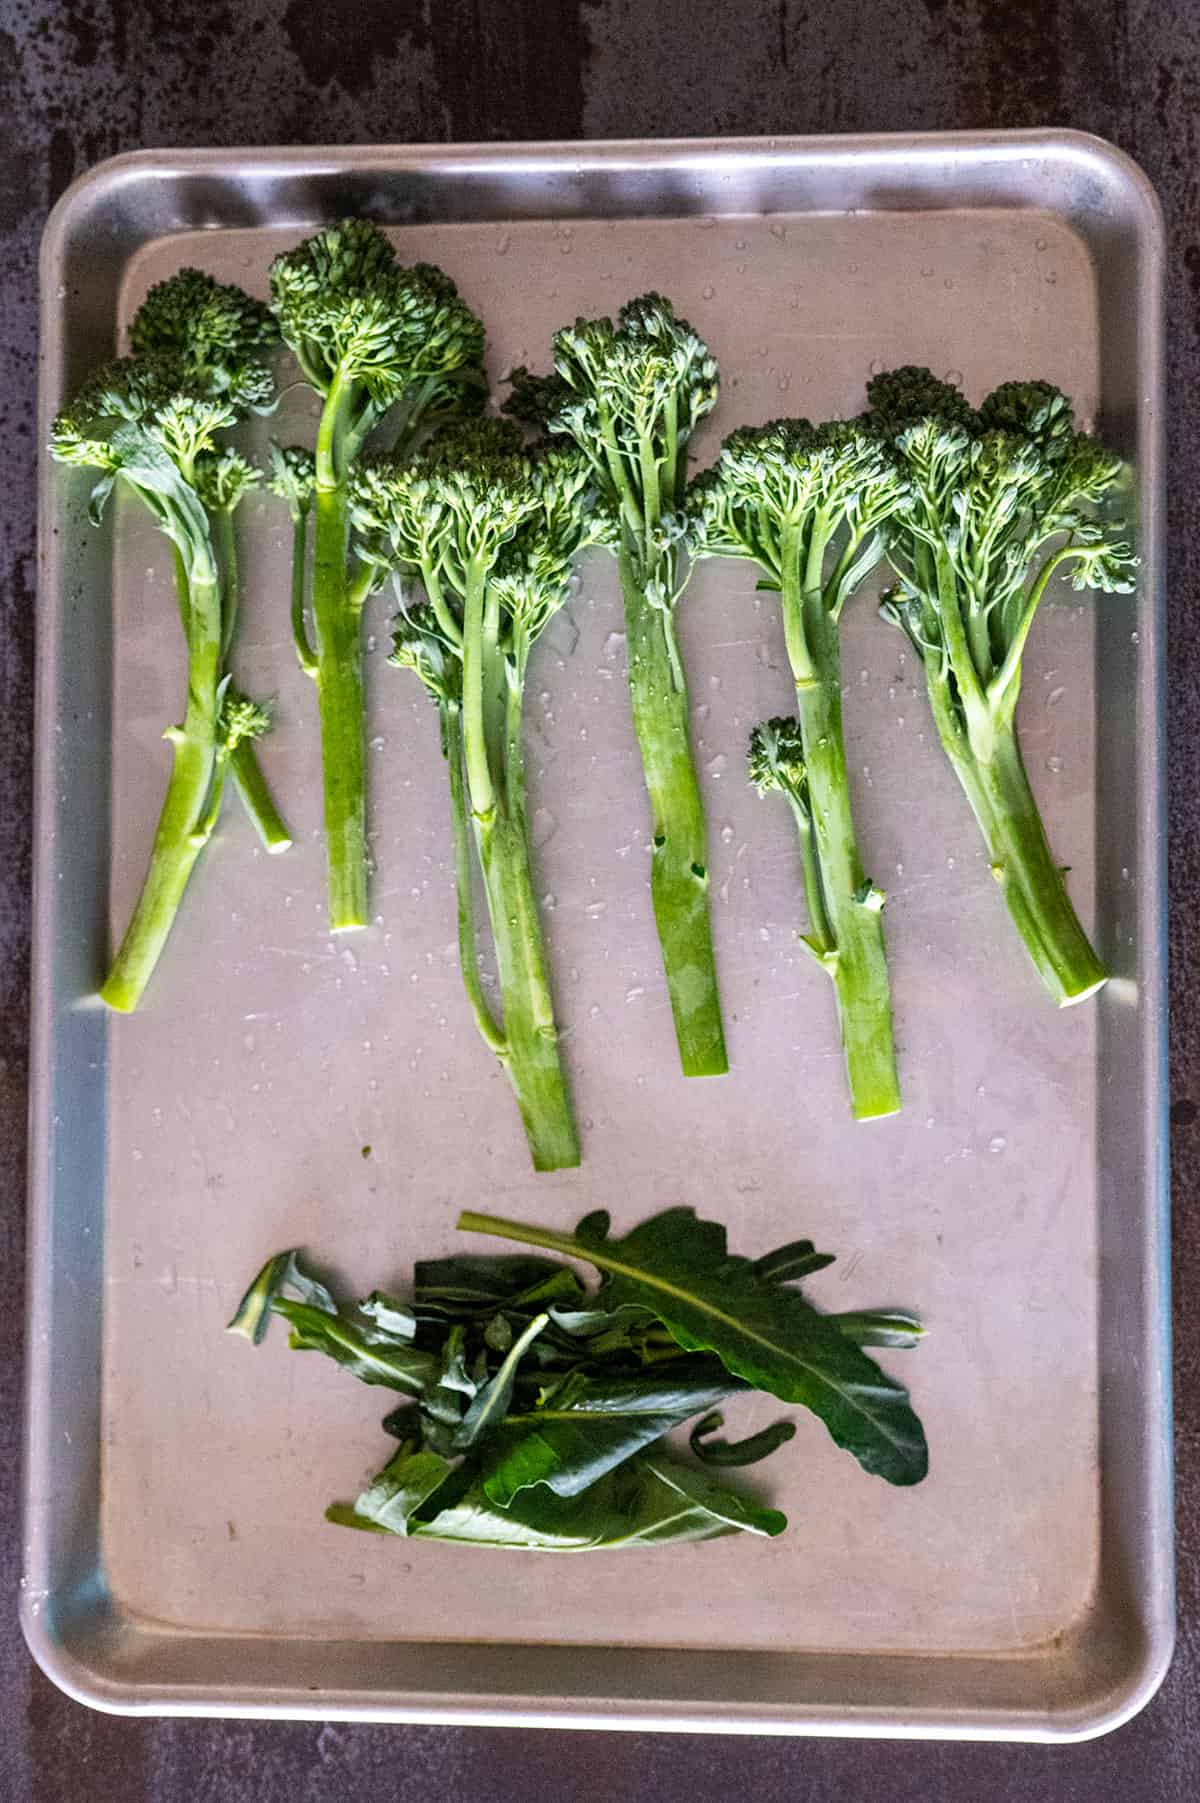 leaves removed from raw broccolini.